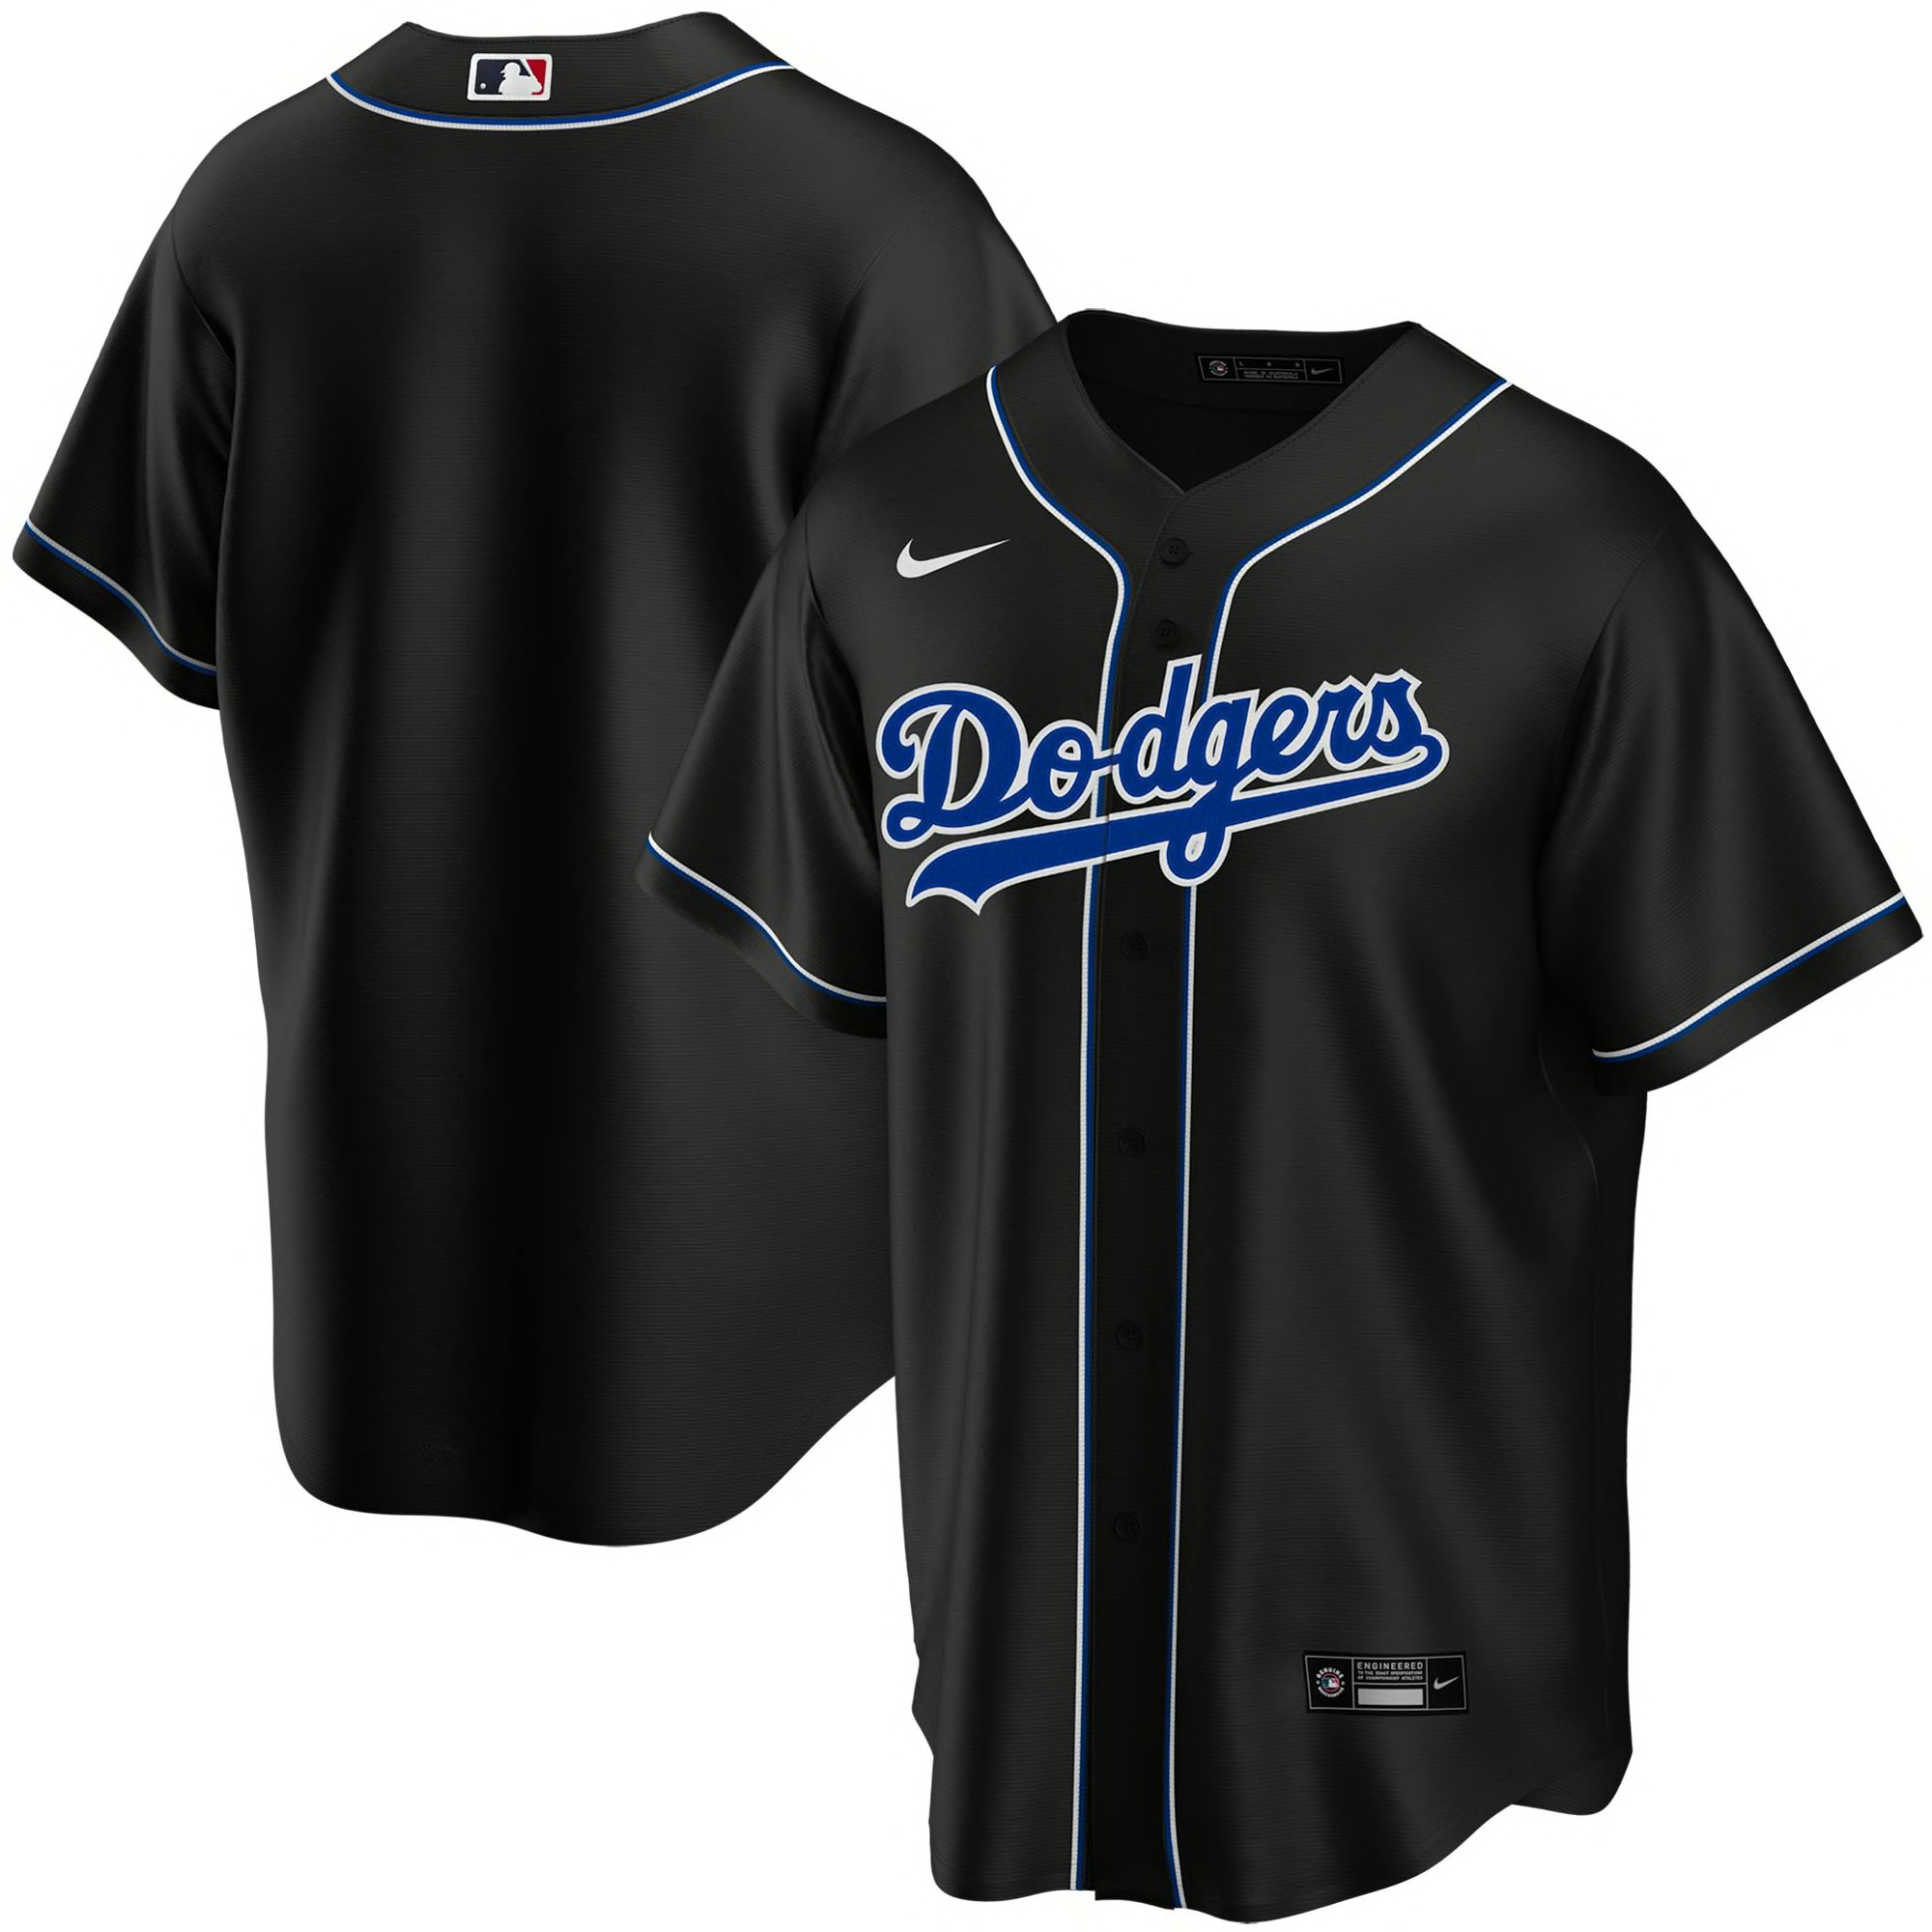 dodgers father's day jersey